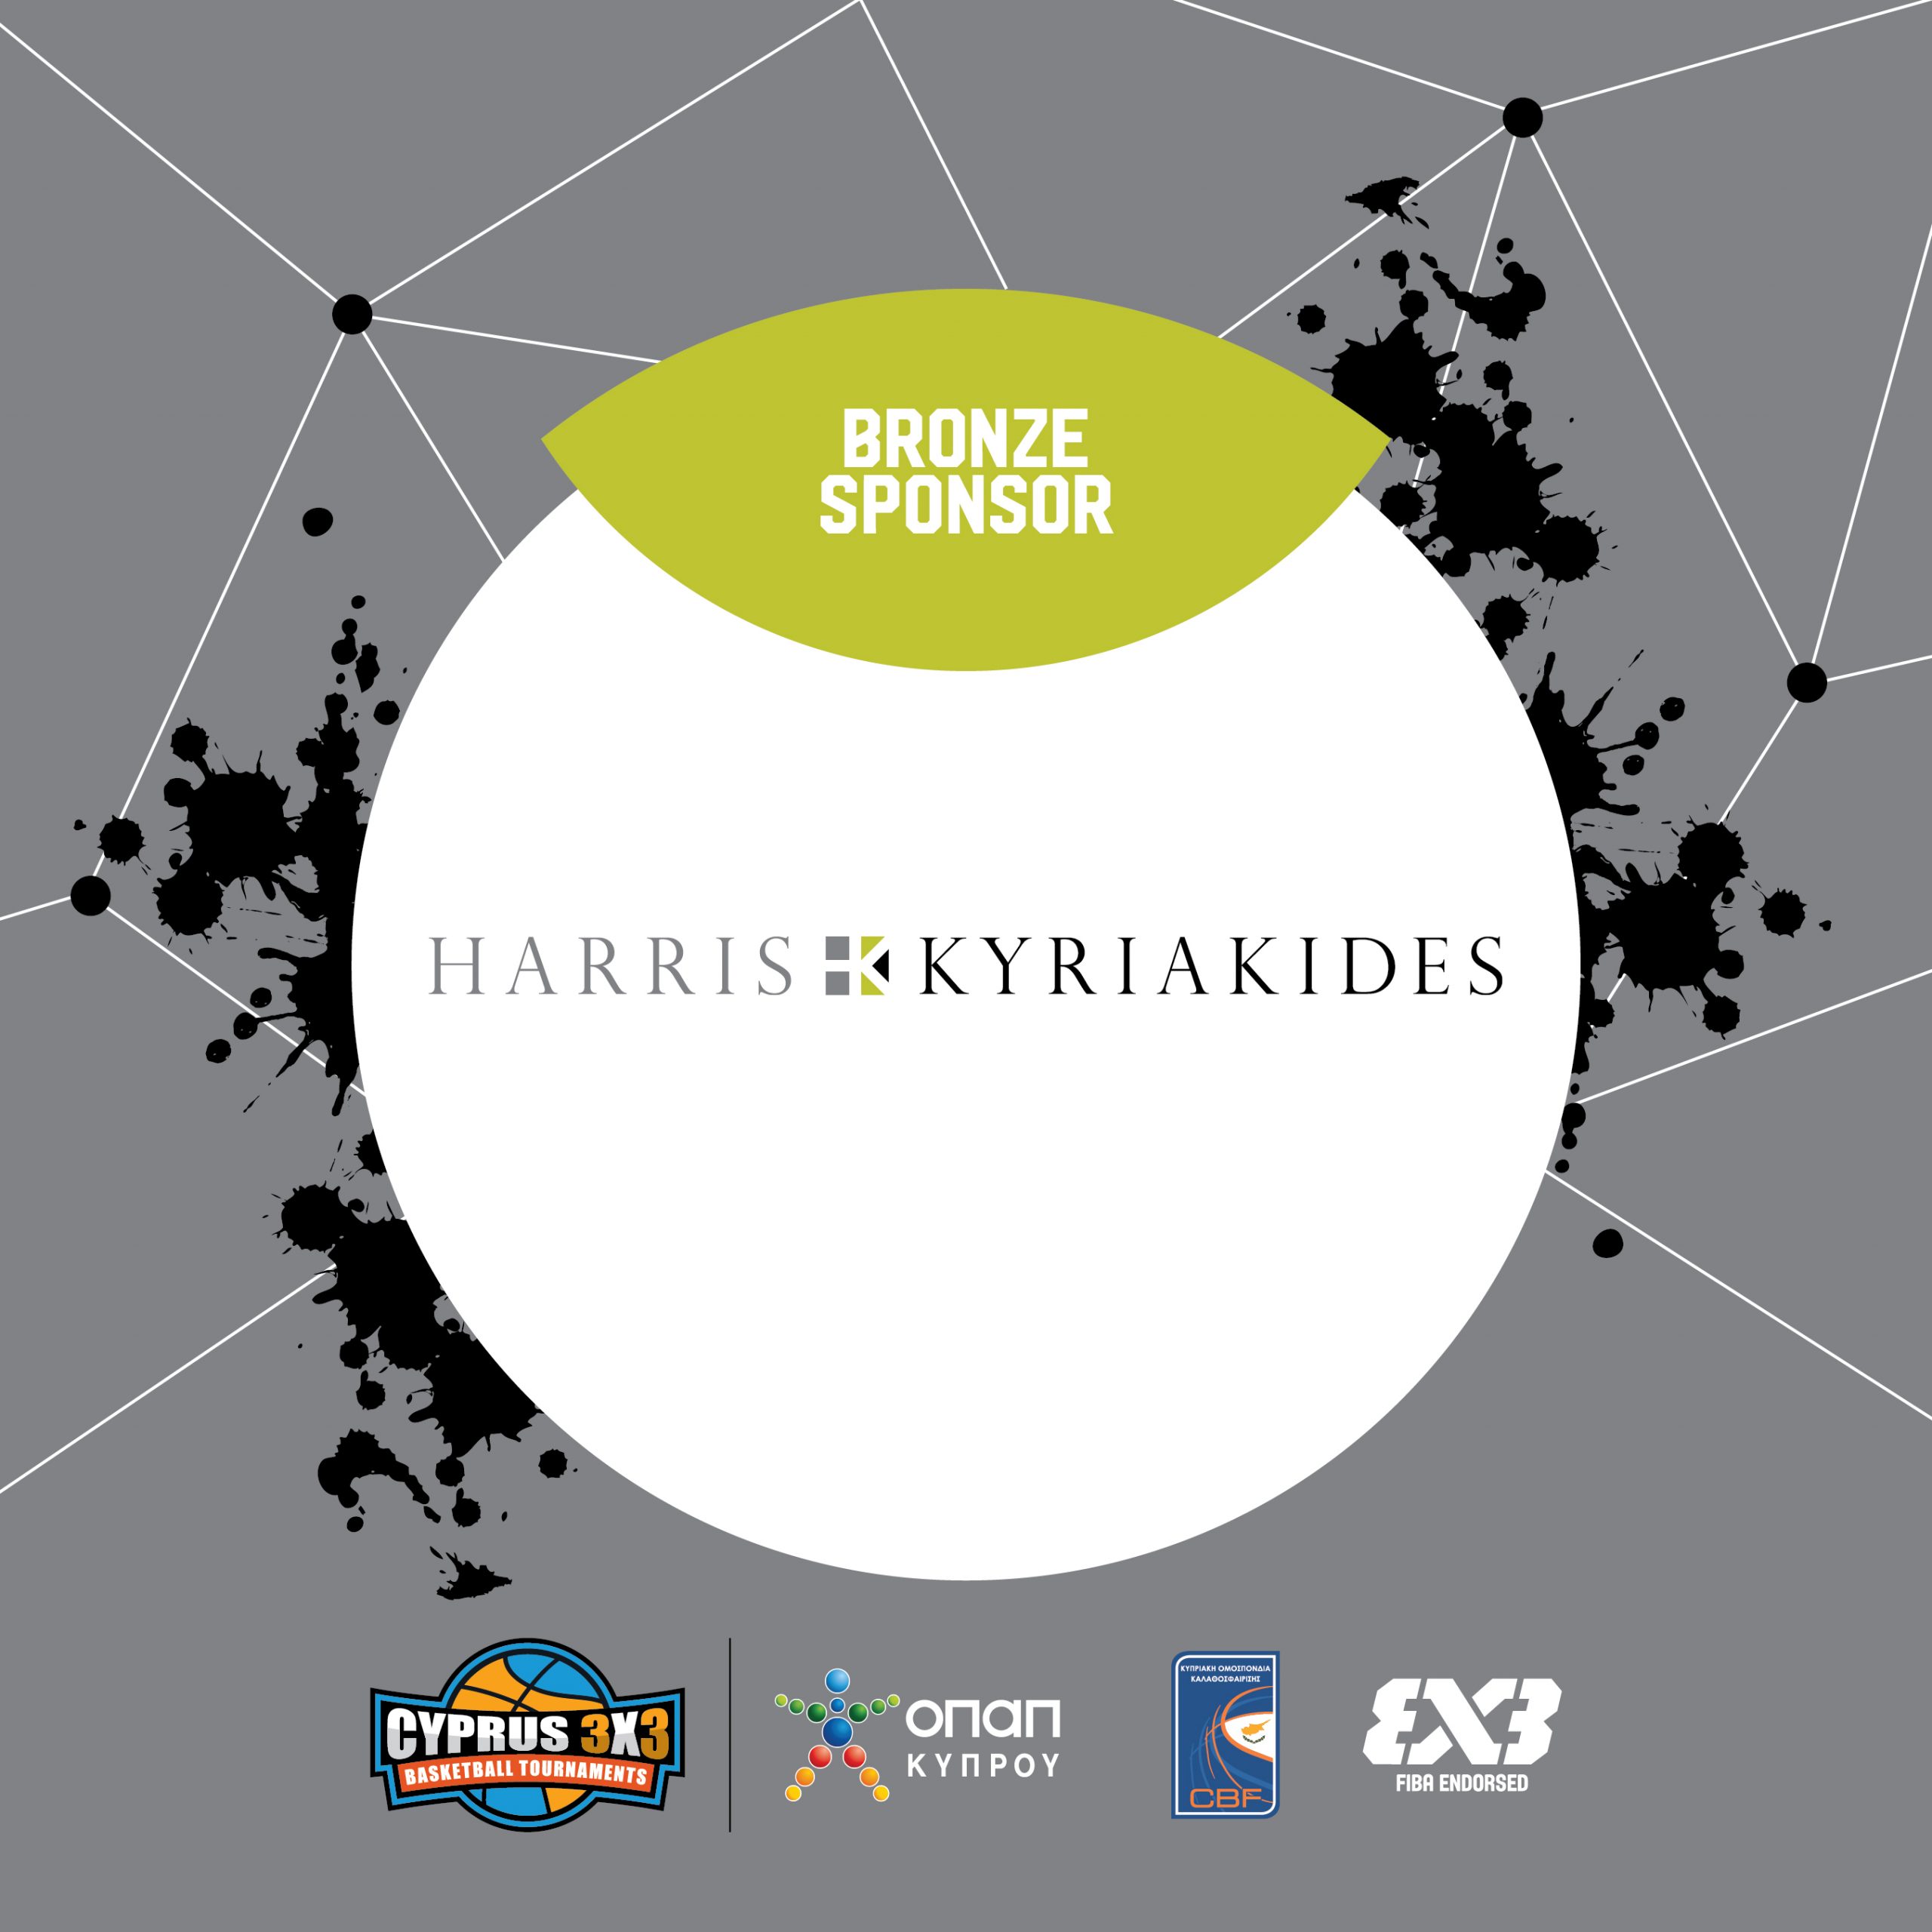 You are currently viewing Harris Kyriakides supports Cyprus 3×3 as a Bronze Sponsor